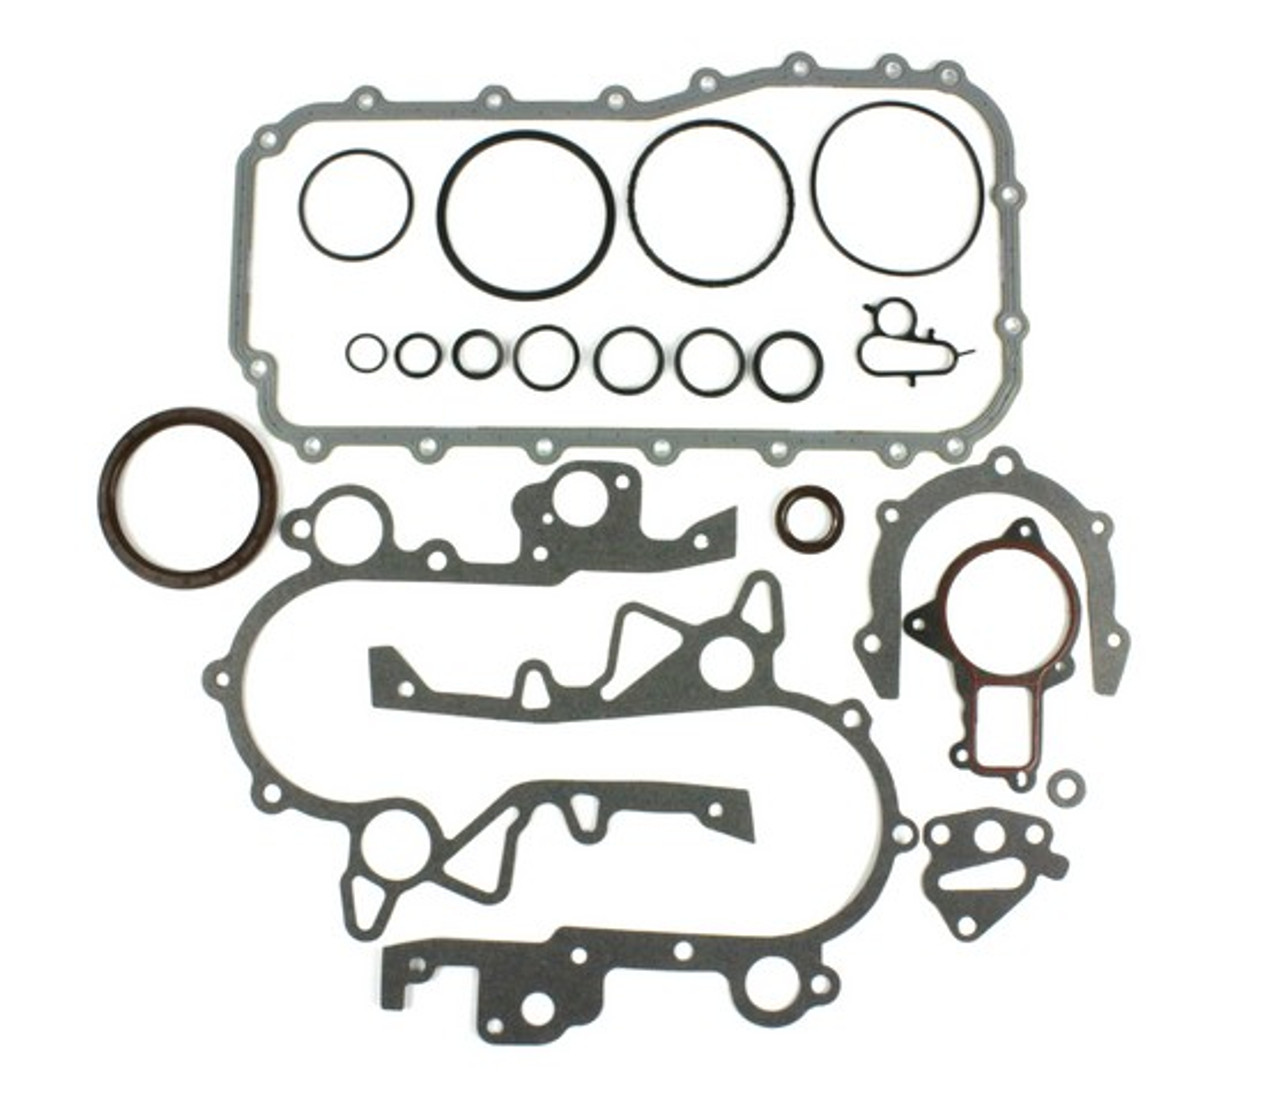 Lower Gasket Set 3.8L 1998 Chrysler Town & Country - LGS1135.44